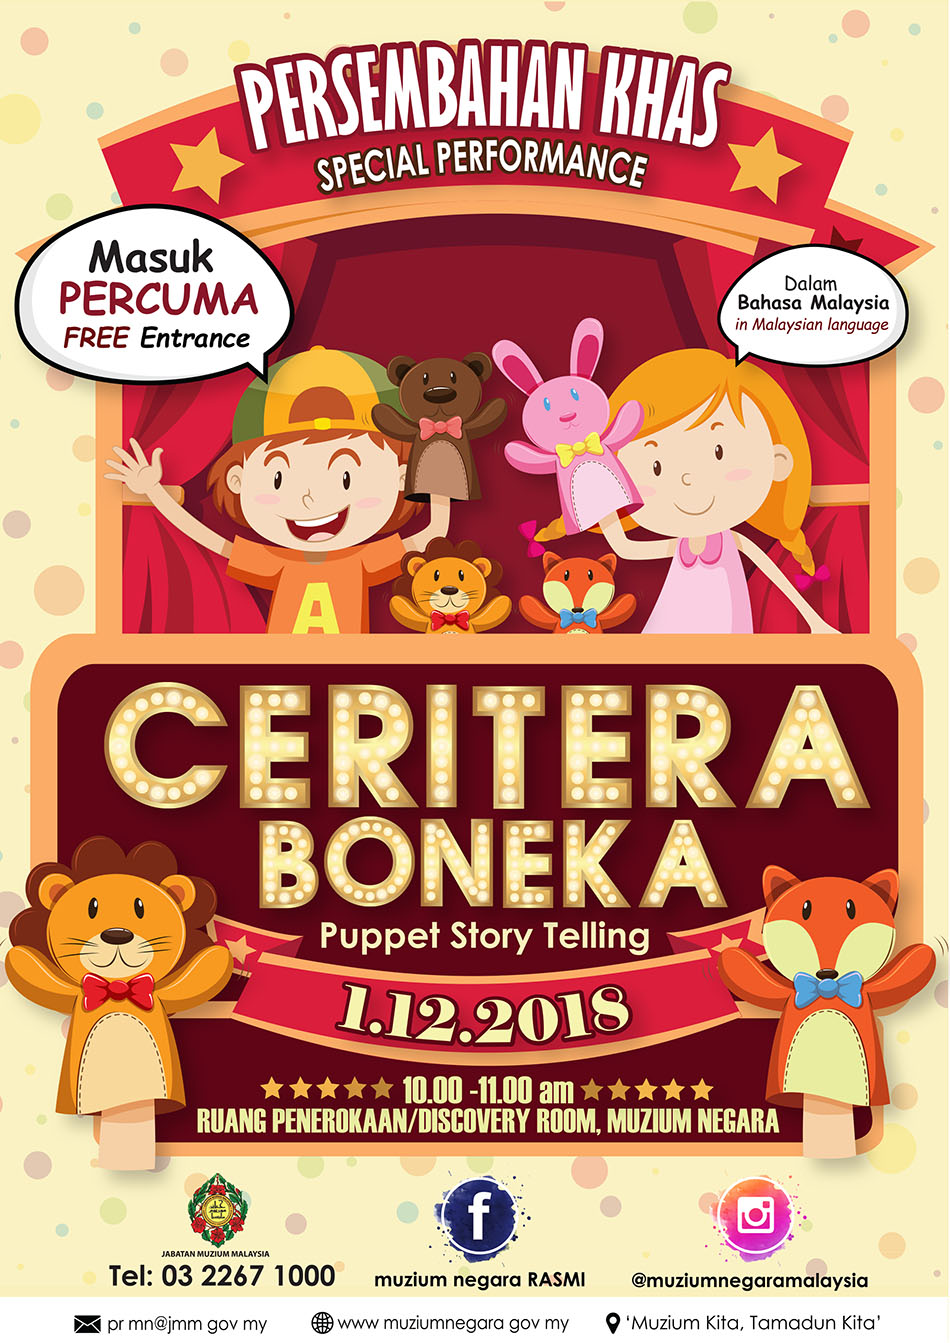 Special Performance: Puppet Story Telling